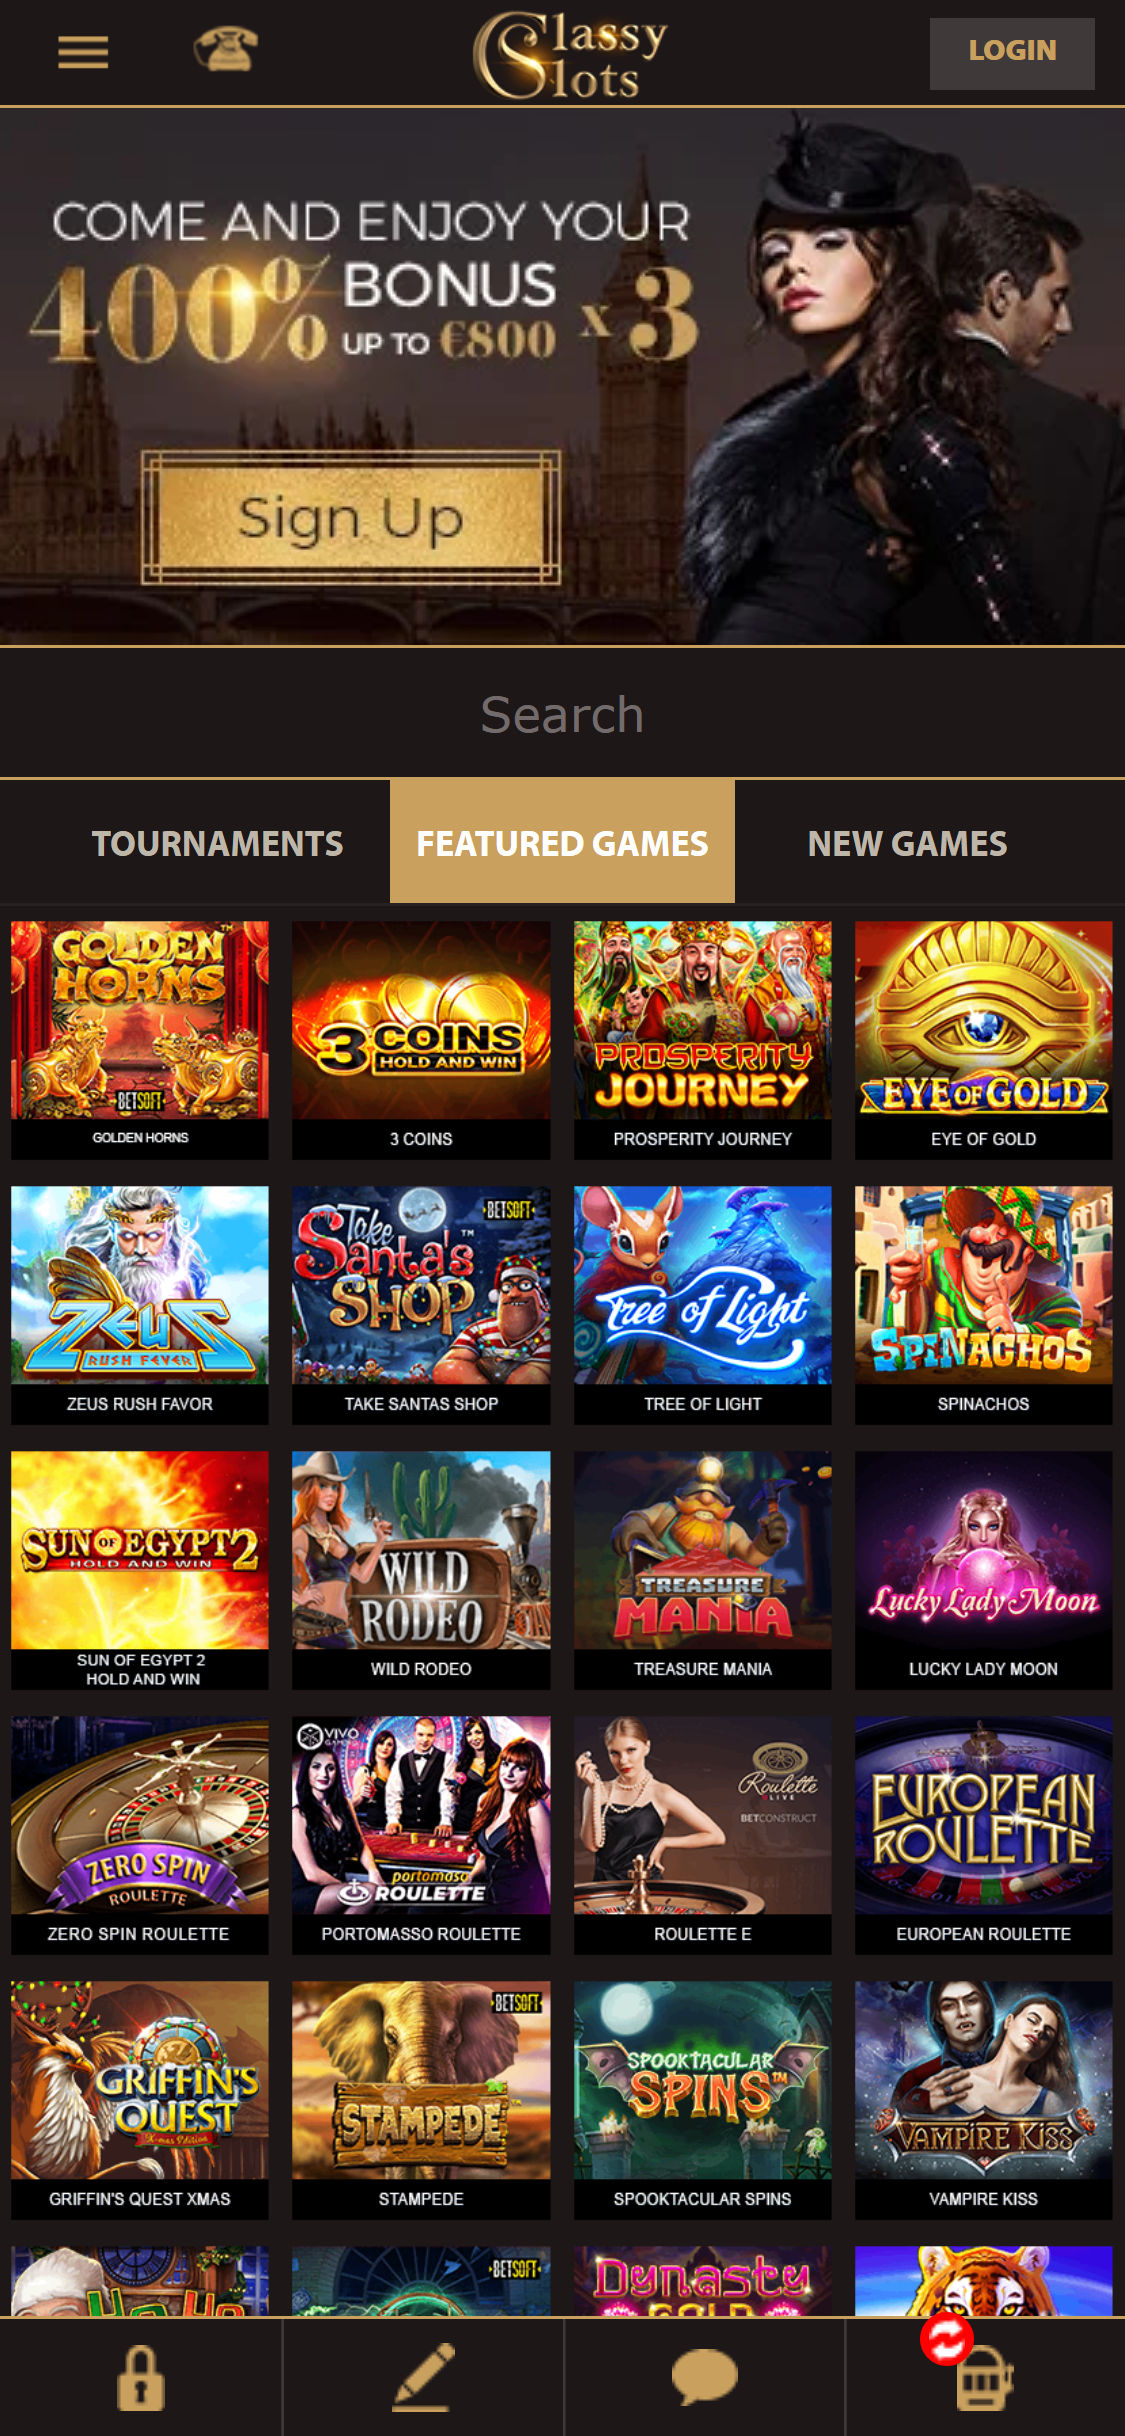 Classy Slots Casino Mobile Review